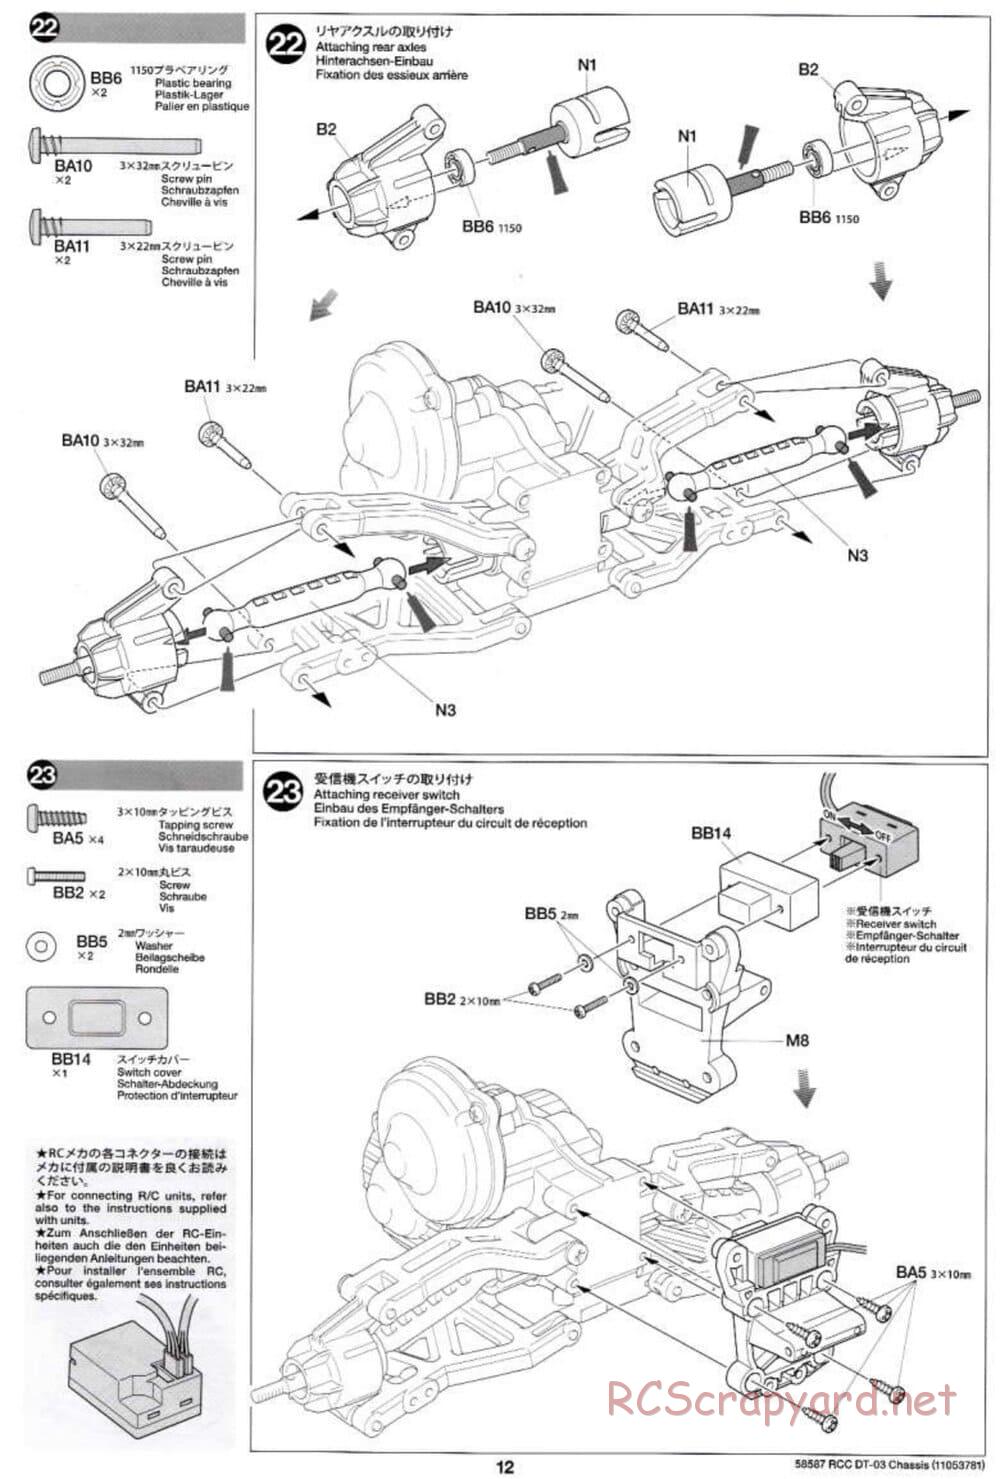 Tamiya - Neo Fighter Buggy Chassis - Manual - Page 12